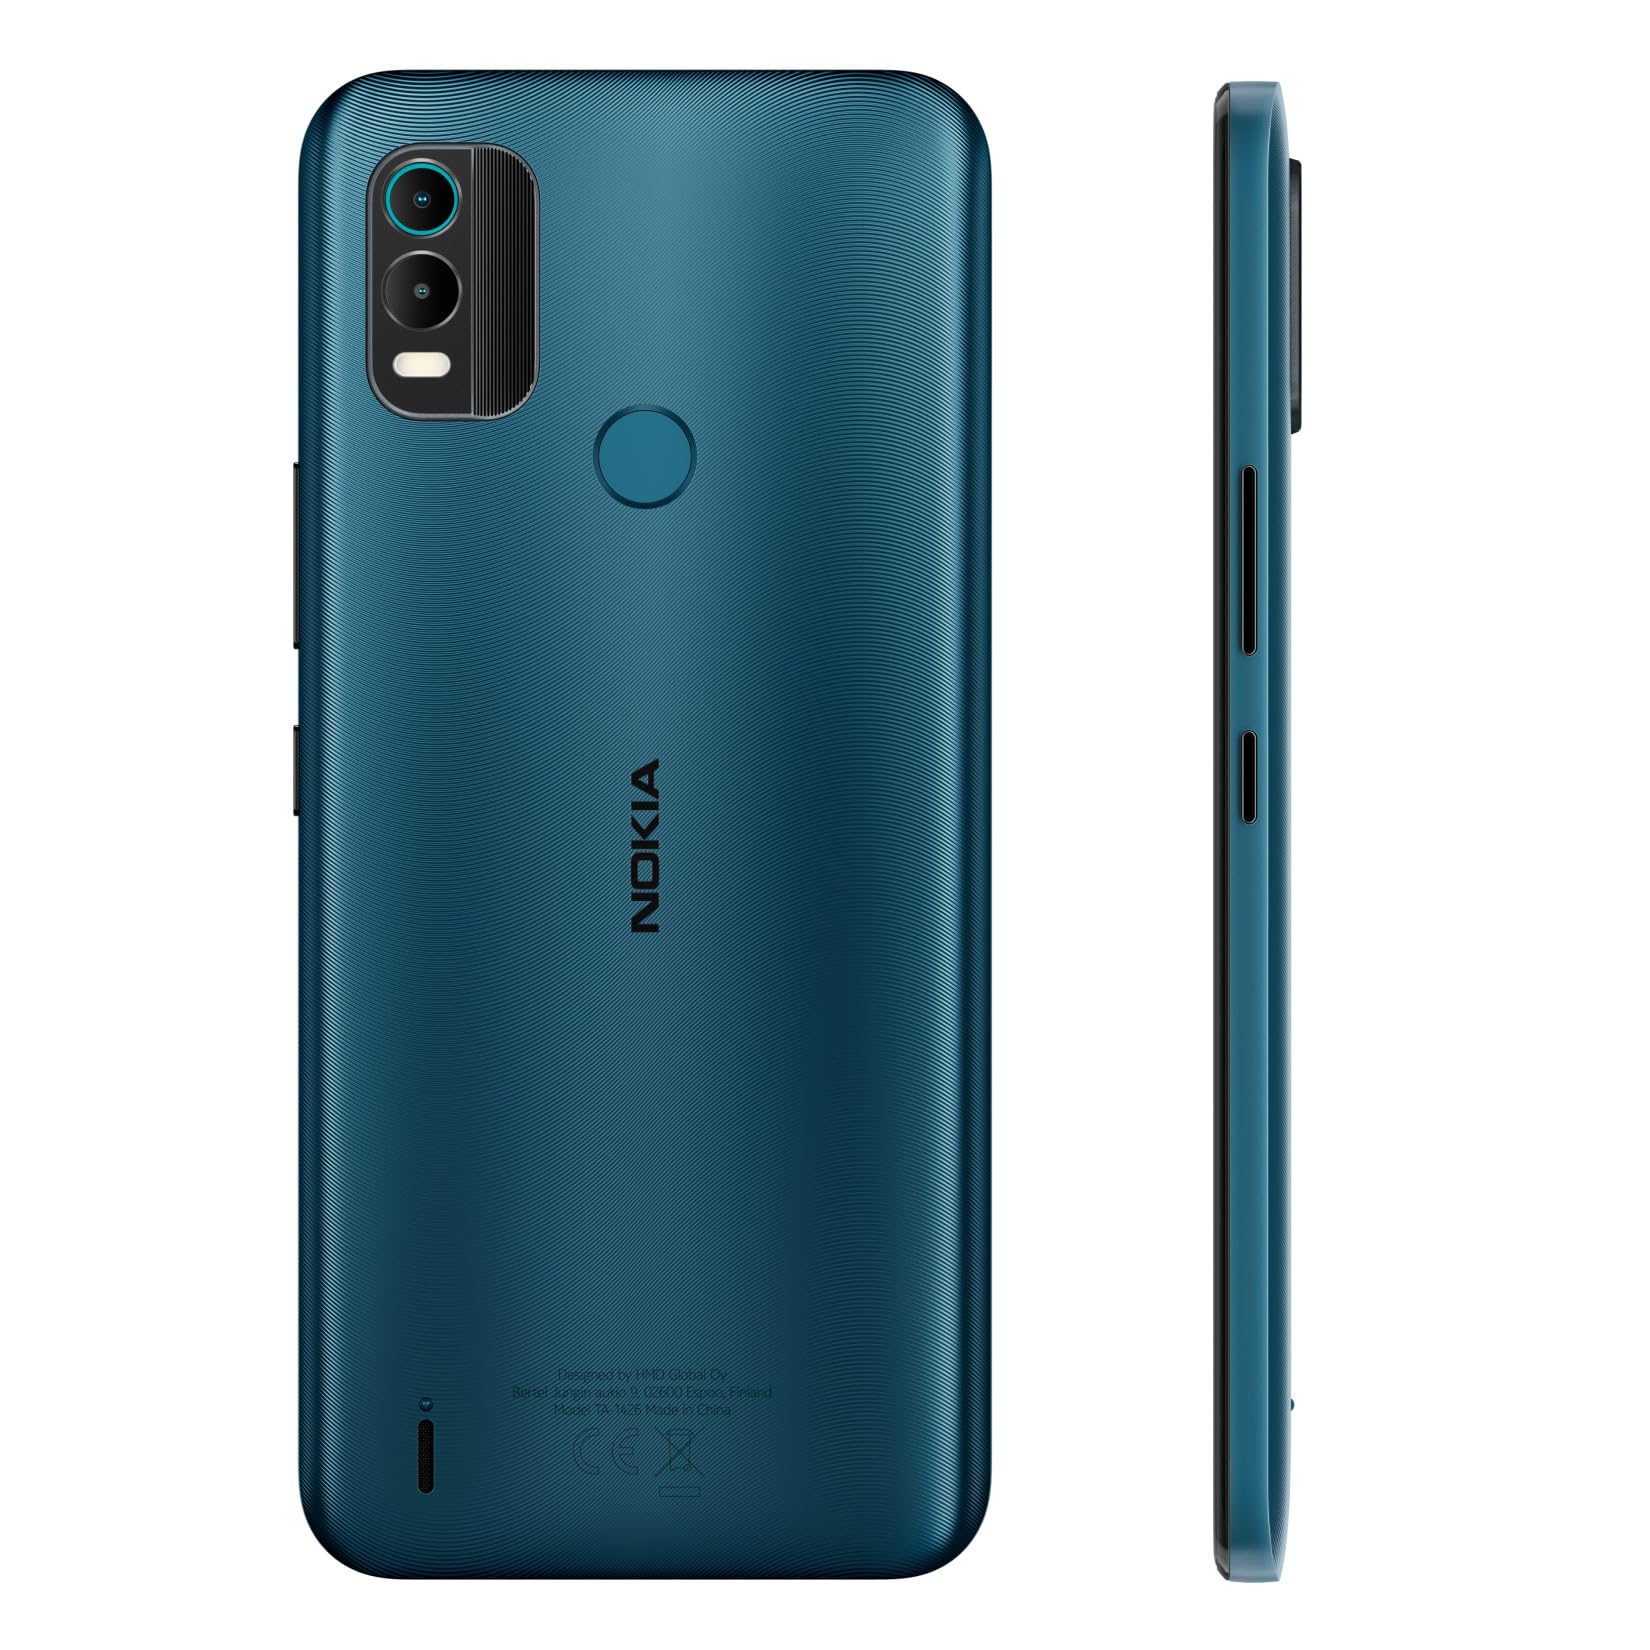 Nokia C21 Plus | Android 11 (Go Edition) | Unlocked Smartphone | 2-Day Battery | Dual SIM | 2/64GB | 6.52-Inch Screen | Cyan